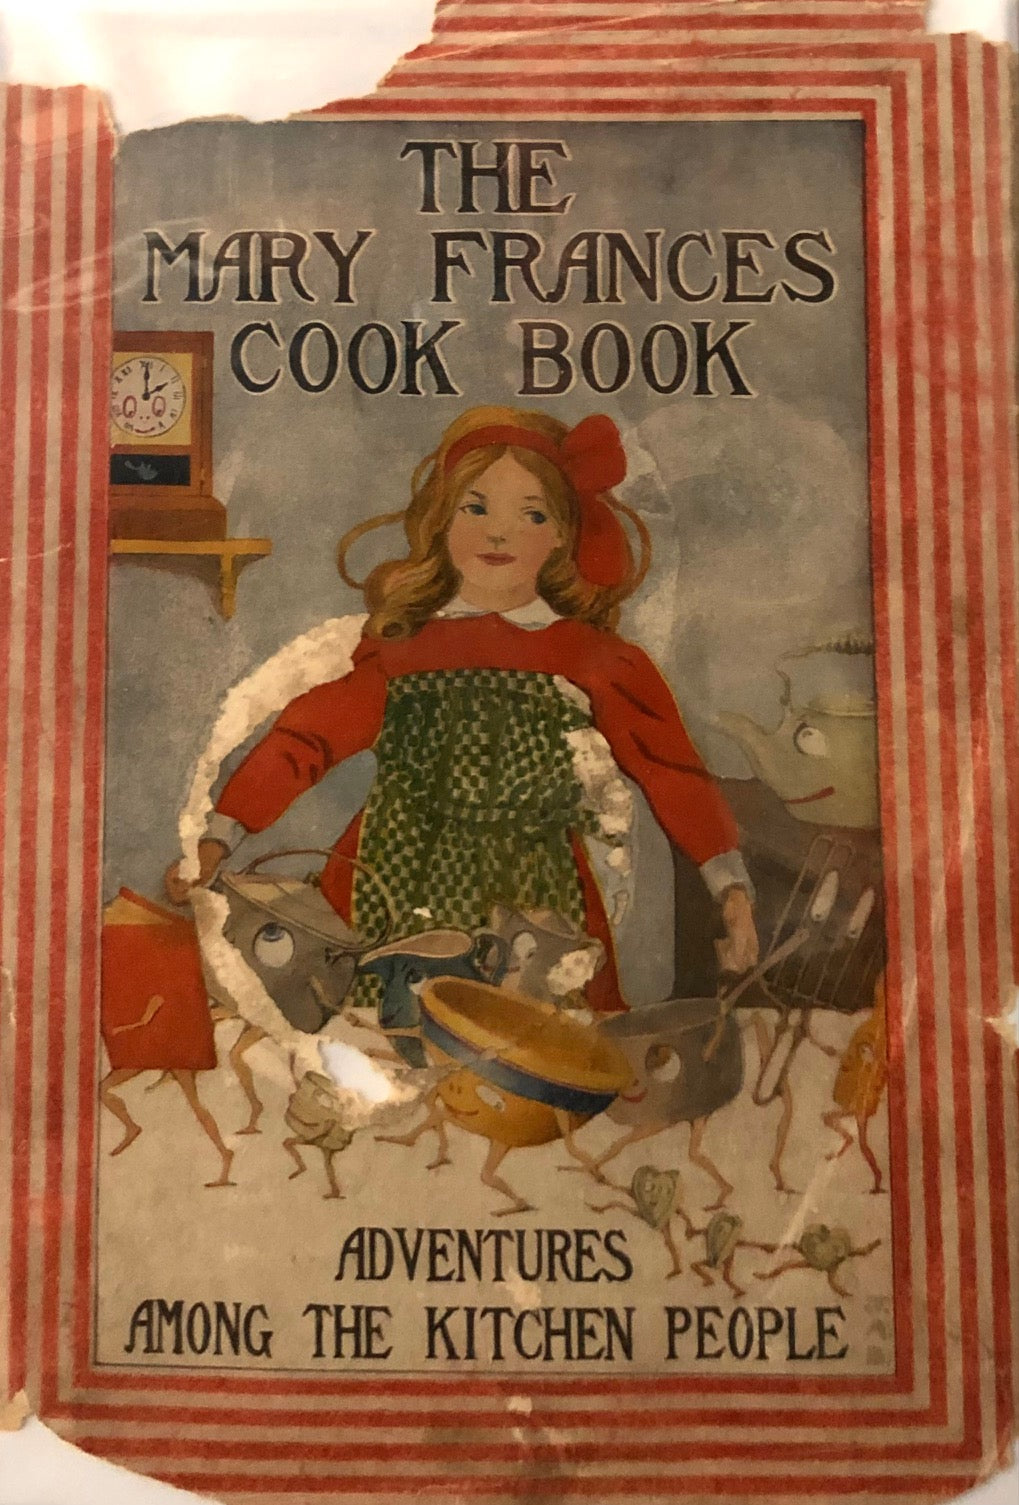 (Children's) Jane Eayre Fryer. The Mary Frances Cook Book or, Adventures Among the Kitchen People.